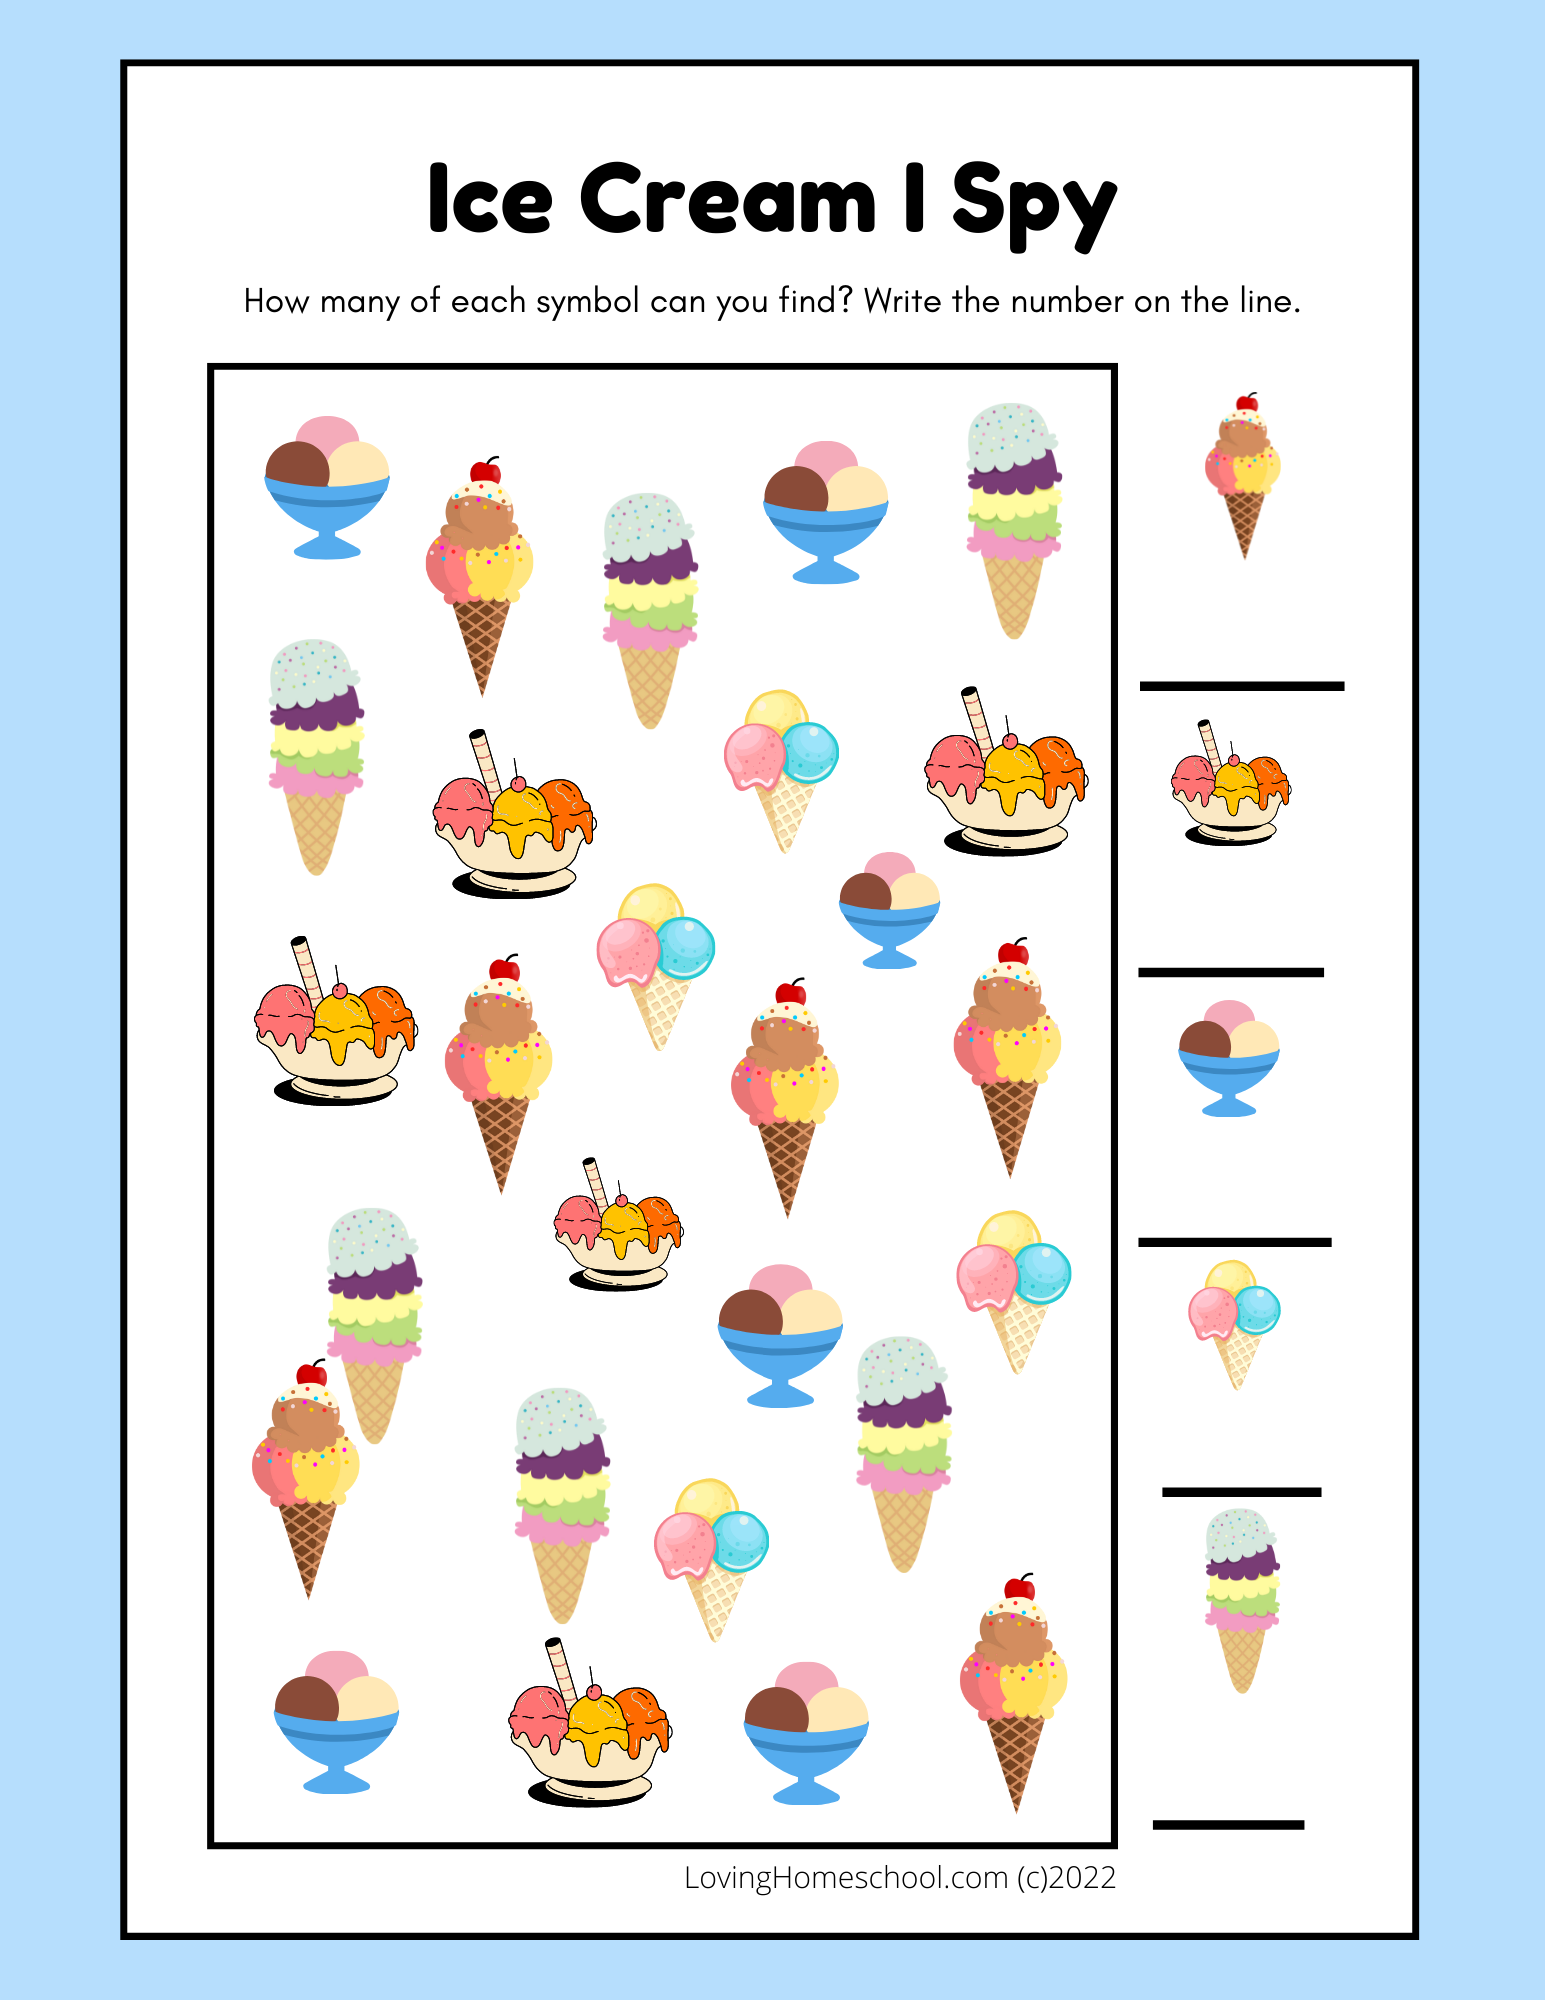 Ice Cream I Spy for younger kids